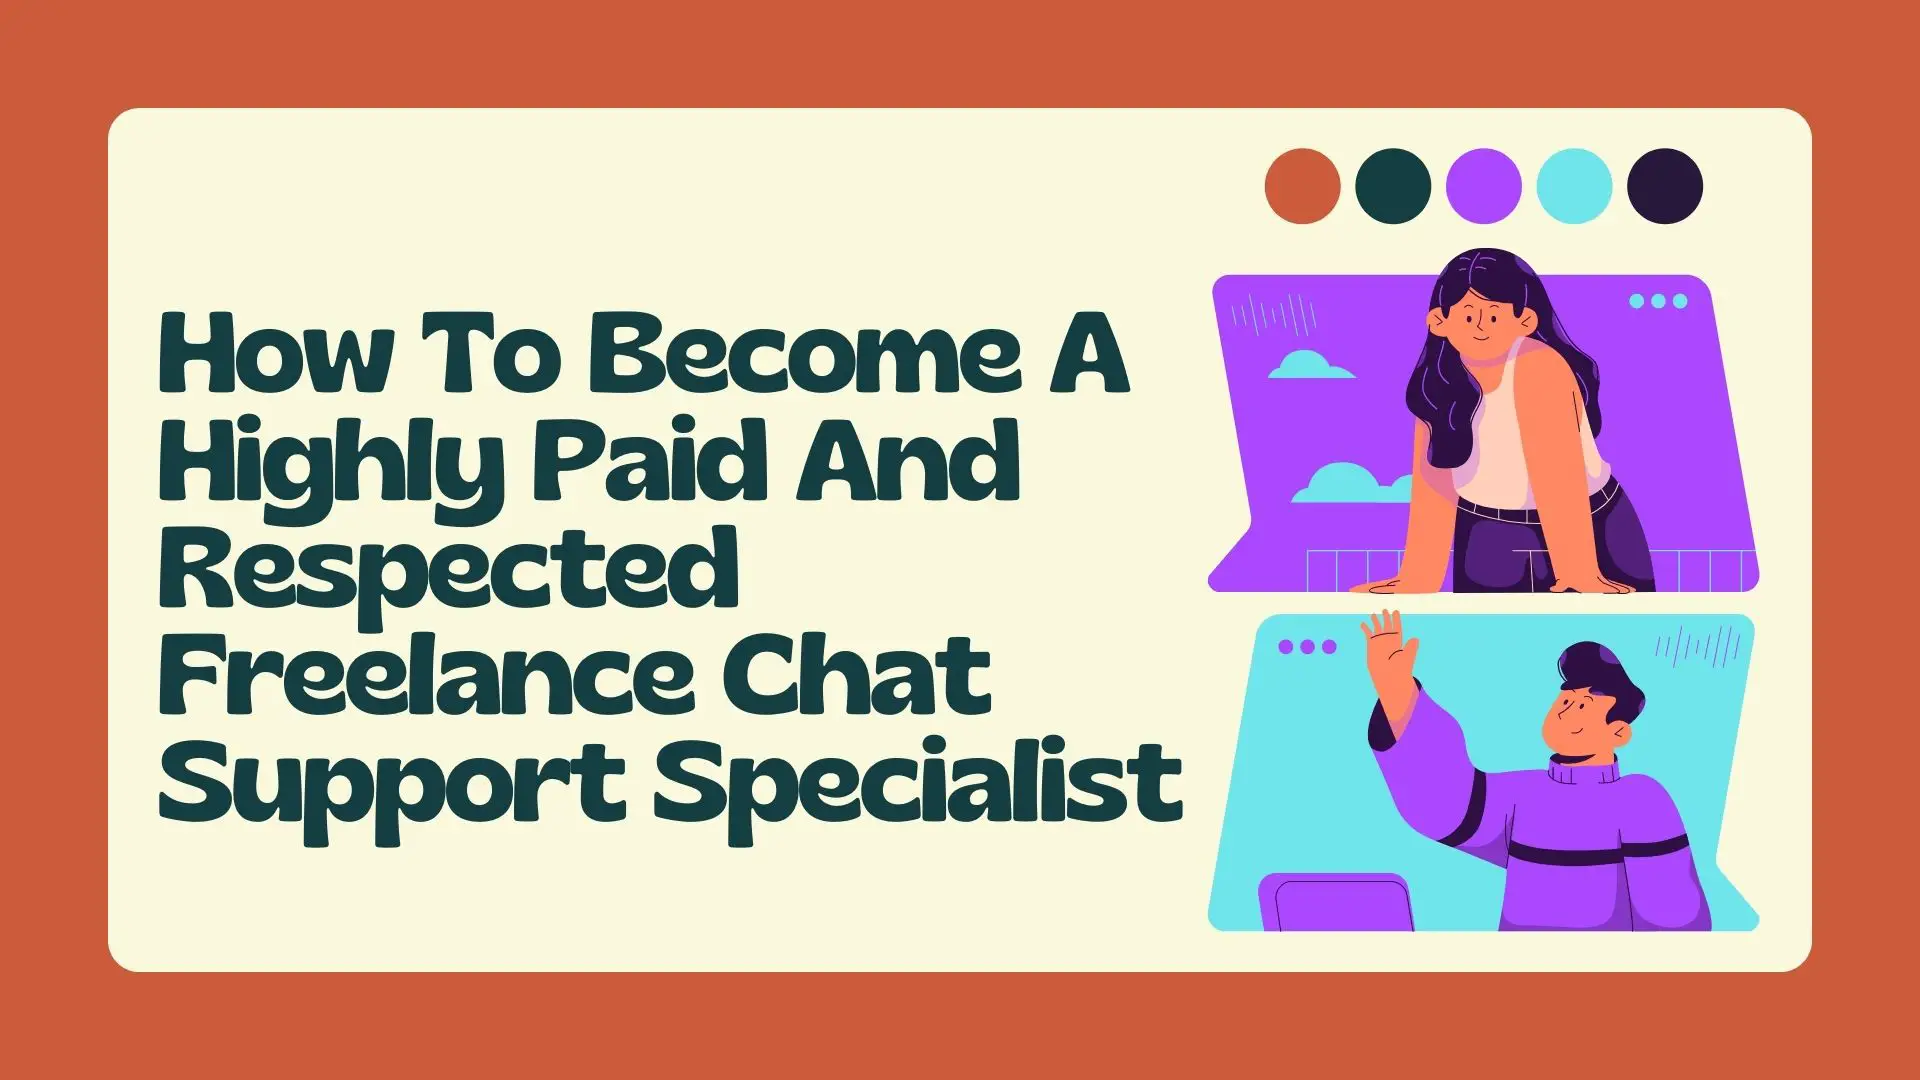 How To Become A Highly Paid And Respected Freelance Chat Support Specialist